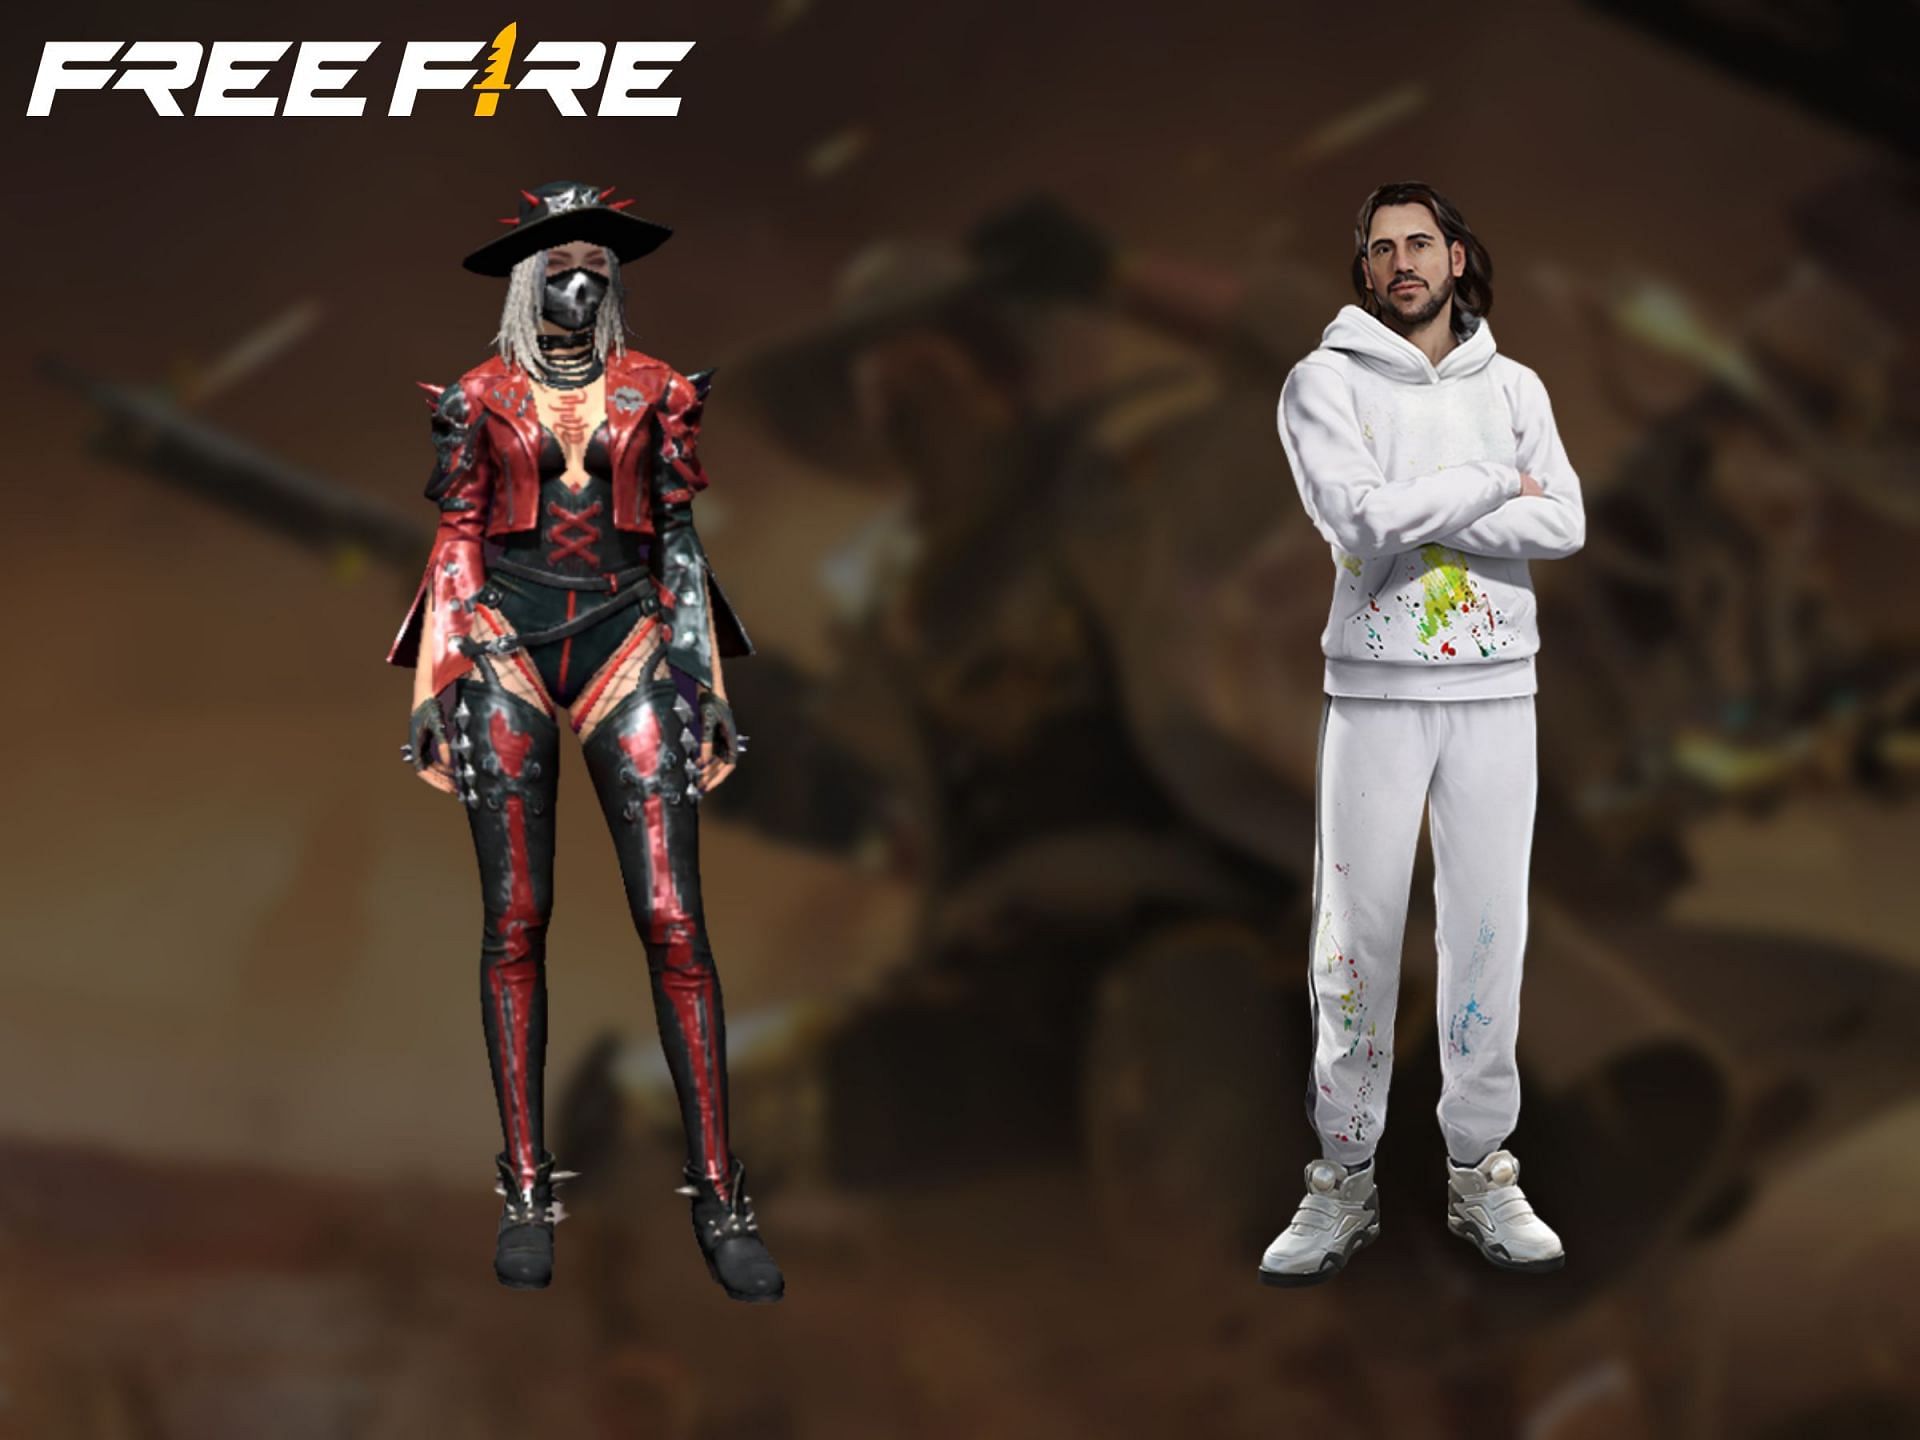 Free characters and bundles can be obtained by using Free Fire redeem codes (Image via Sportskeeda)